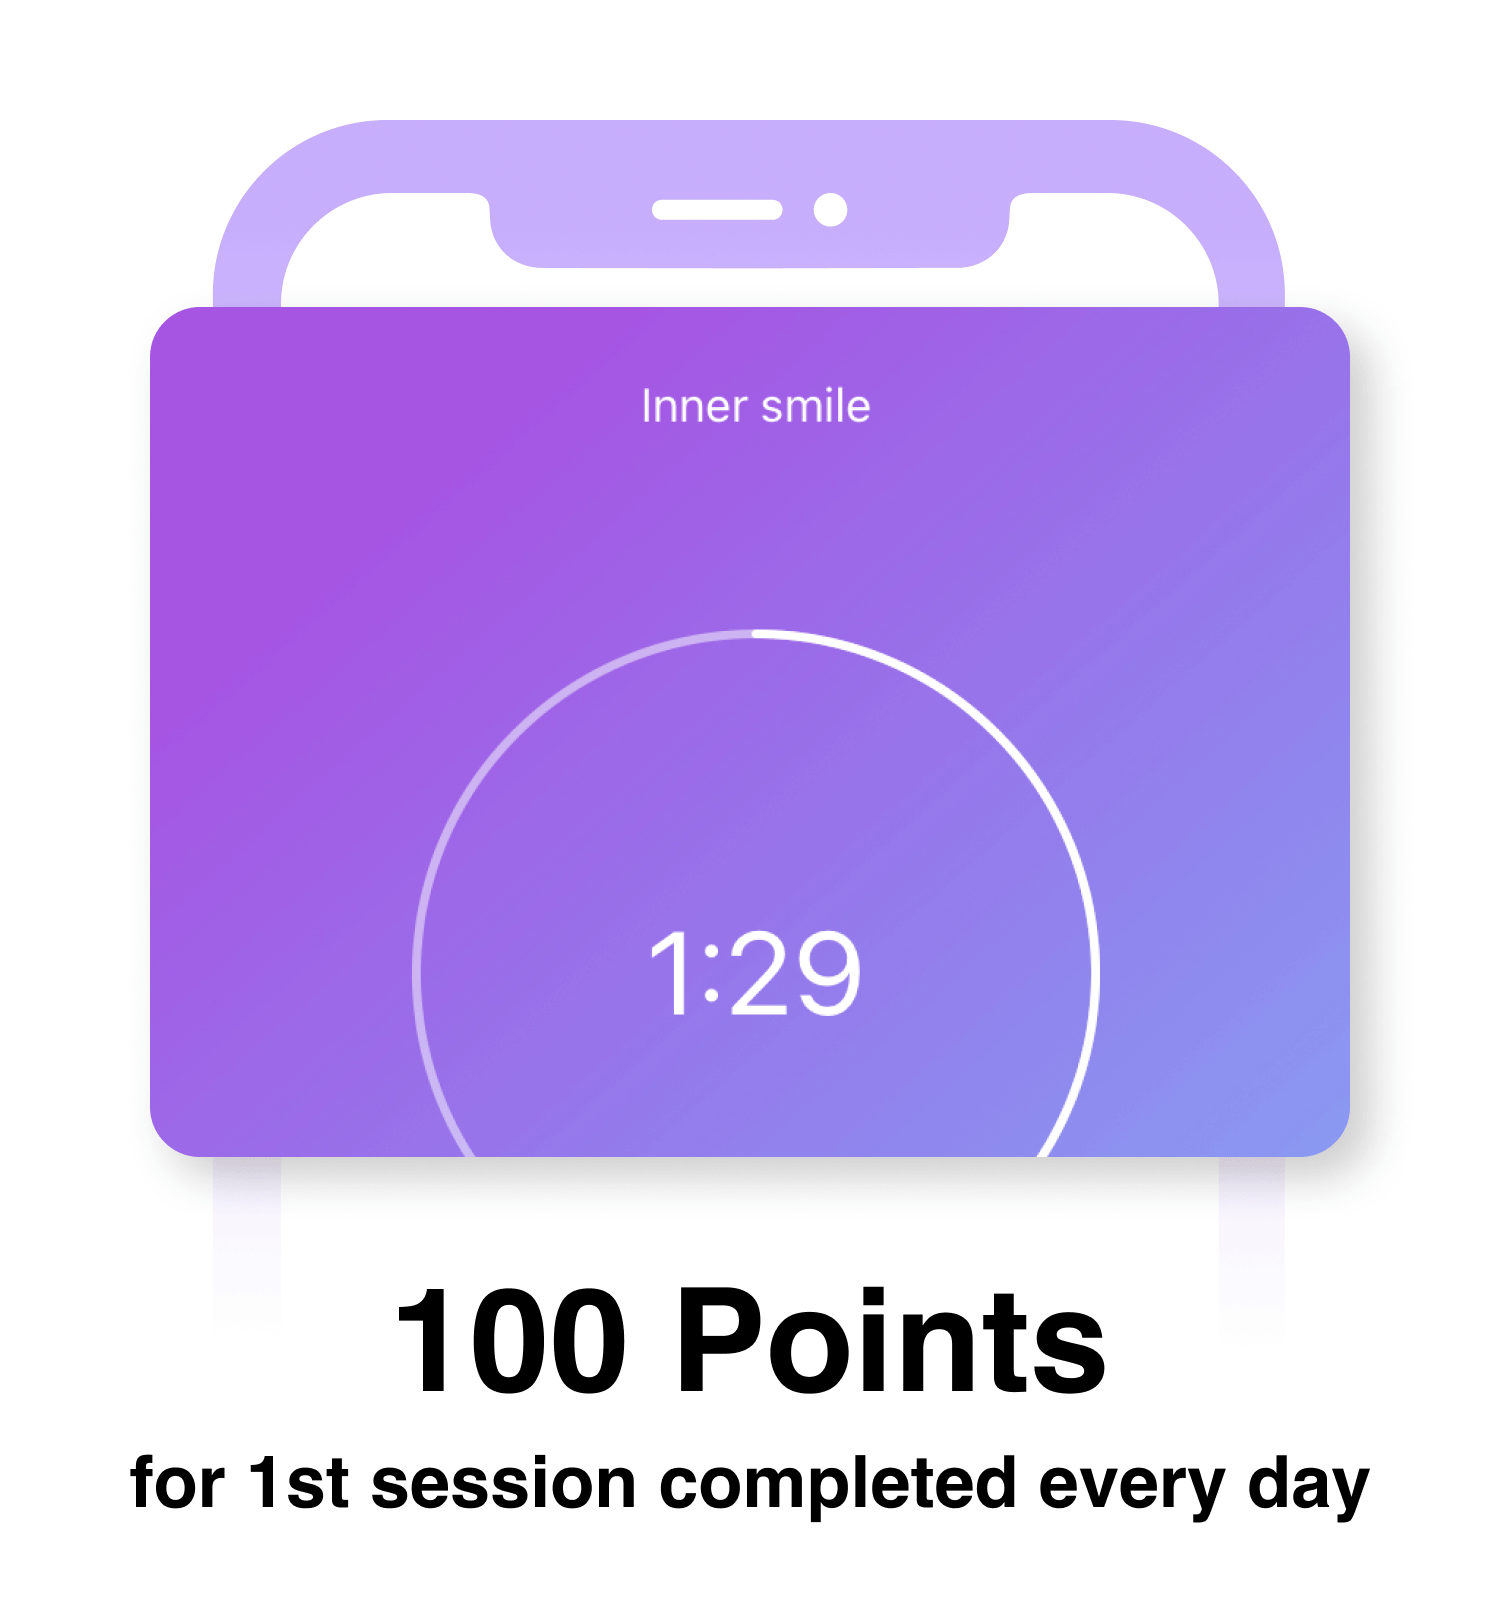 dailypoint_100points.gif